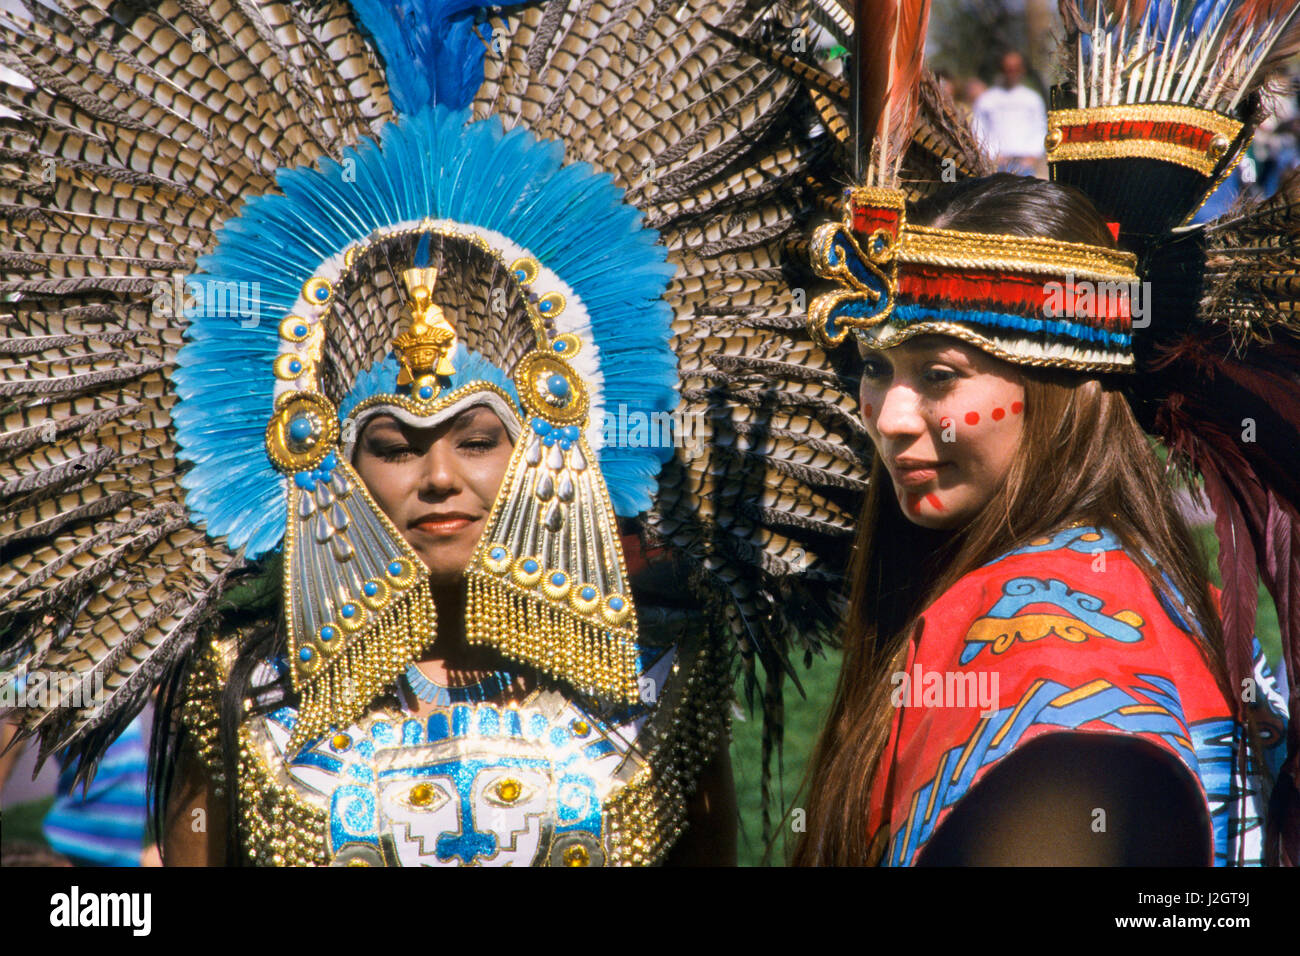 Close-up of two Aztec women dressed in magnificent traditional Aztec regalia and headdresses pose during a ceremonial dance presentation. Stock Photo